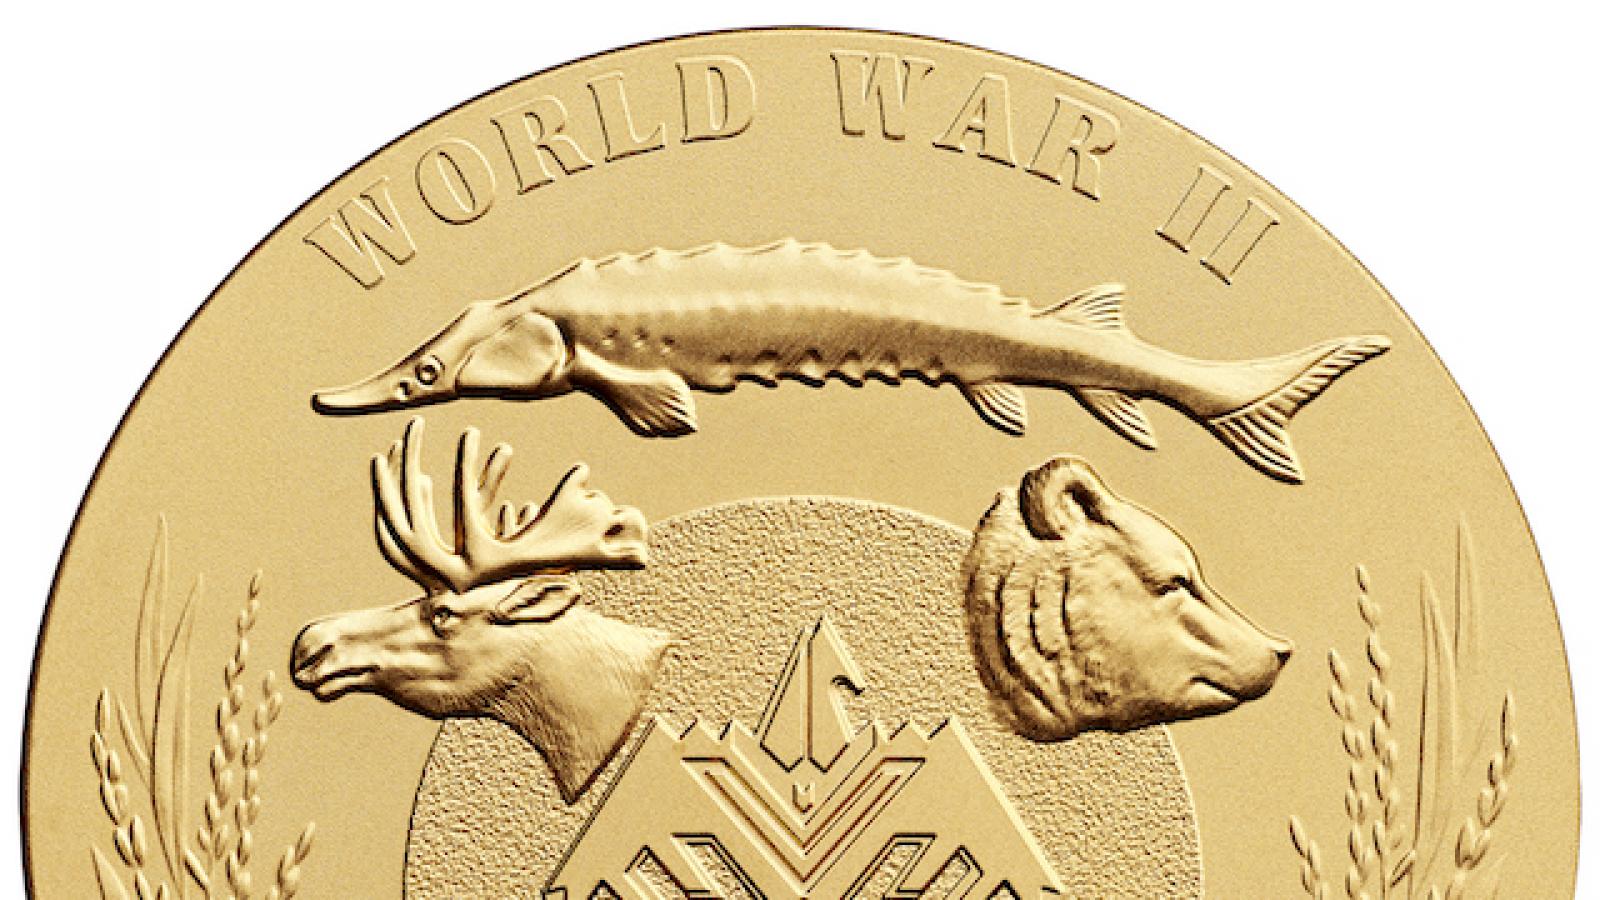 a bronze medal with a stylized figure of an eagle in the center encircled by realistic depictions of a sturgeon, a bear's head, a crane's head, an eagle's head, a wolf head, and a moose's head. On the left and right side, sheaves of grain. 